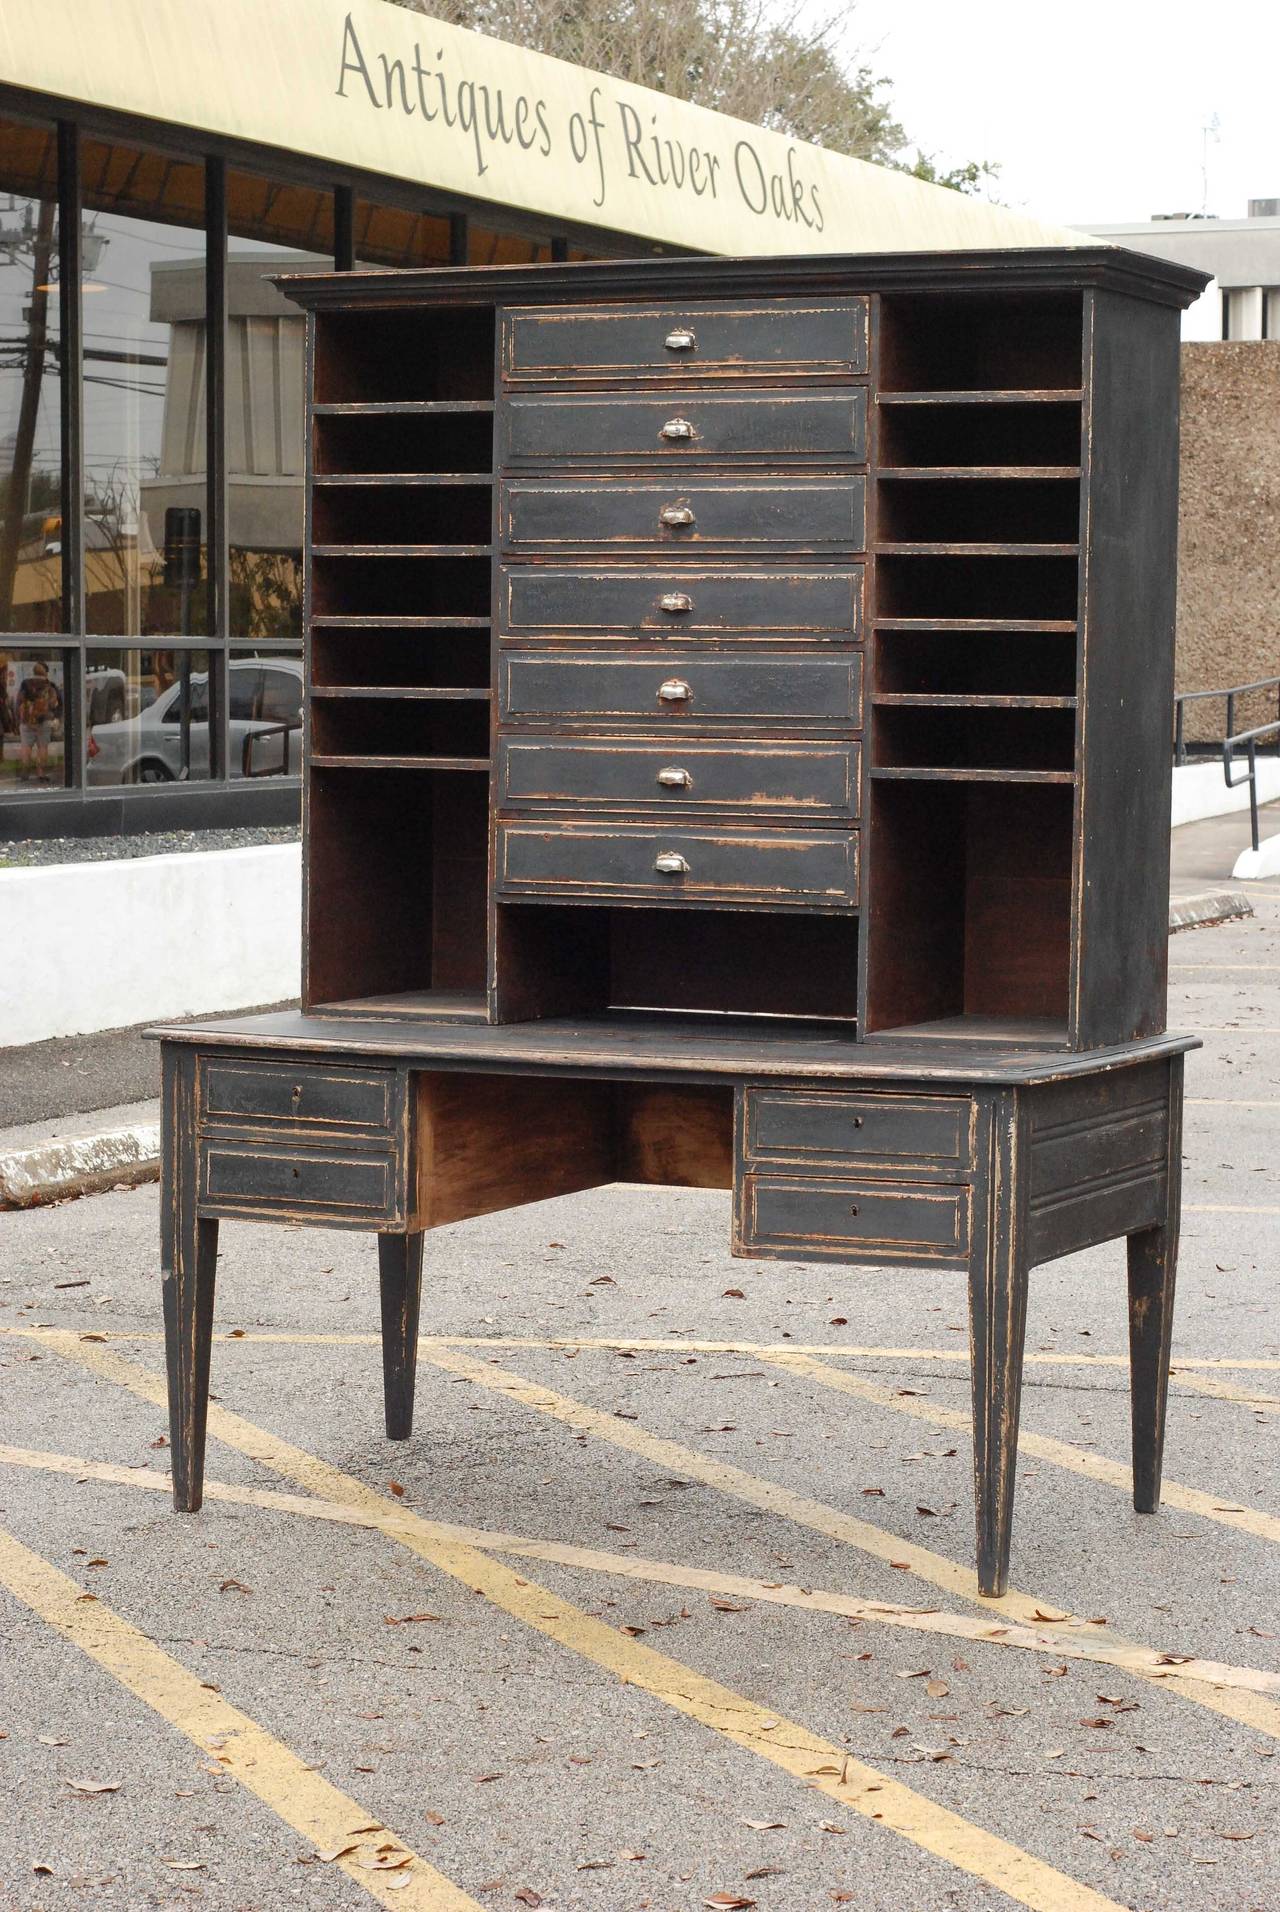 Late 19th century Napoleon III notary desk with hutch in original finish and hardware.